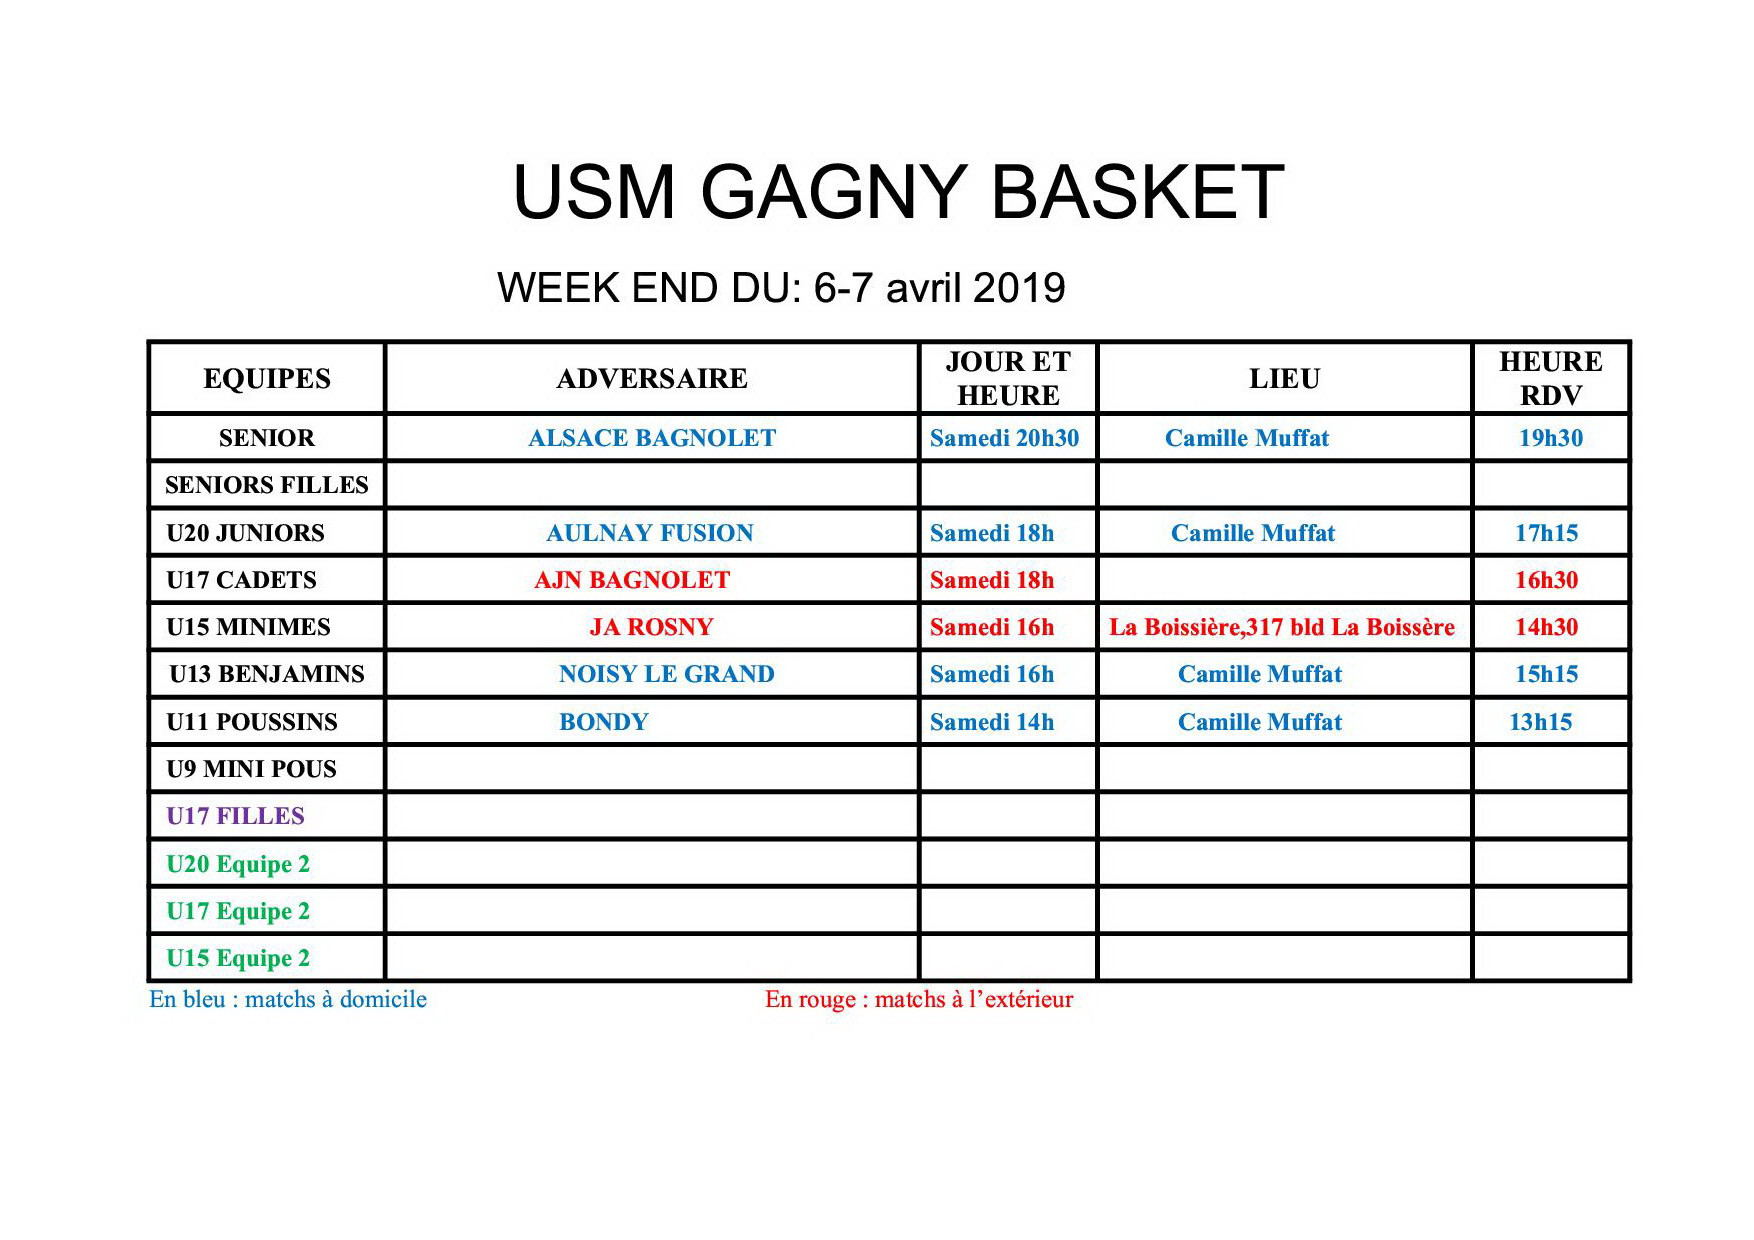 Usmg gagny planning week end 6 7 avril 2019